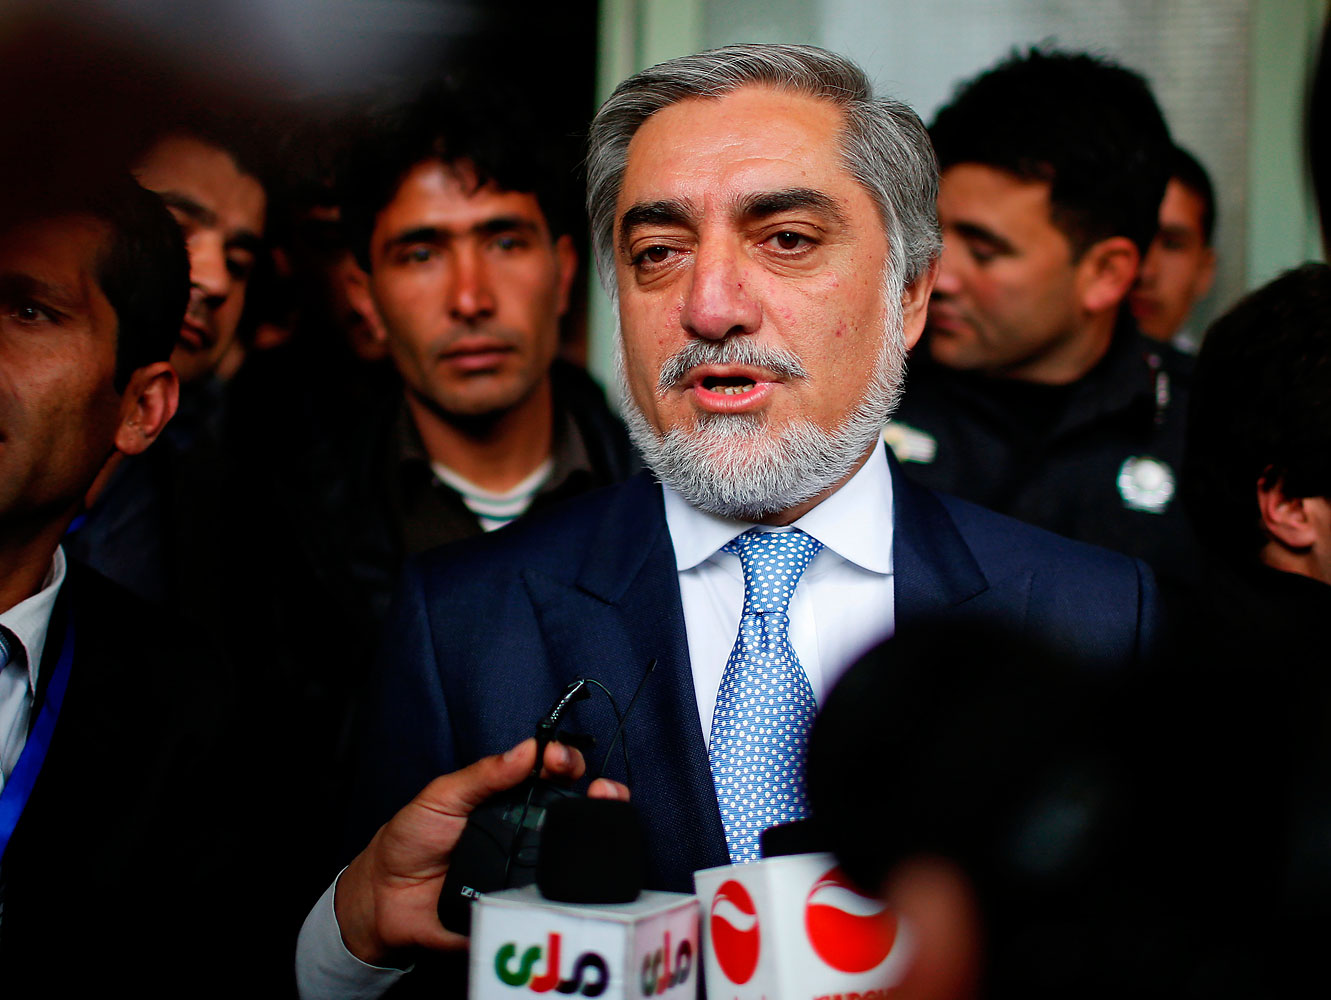 Afghan presidential candidate Abdullah Abdullah speaks to the media after voting at a polling station in Kabul